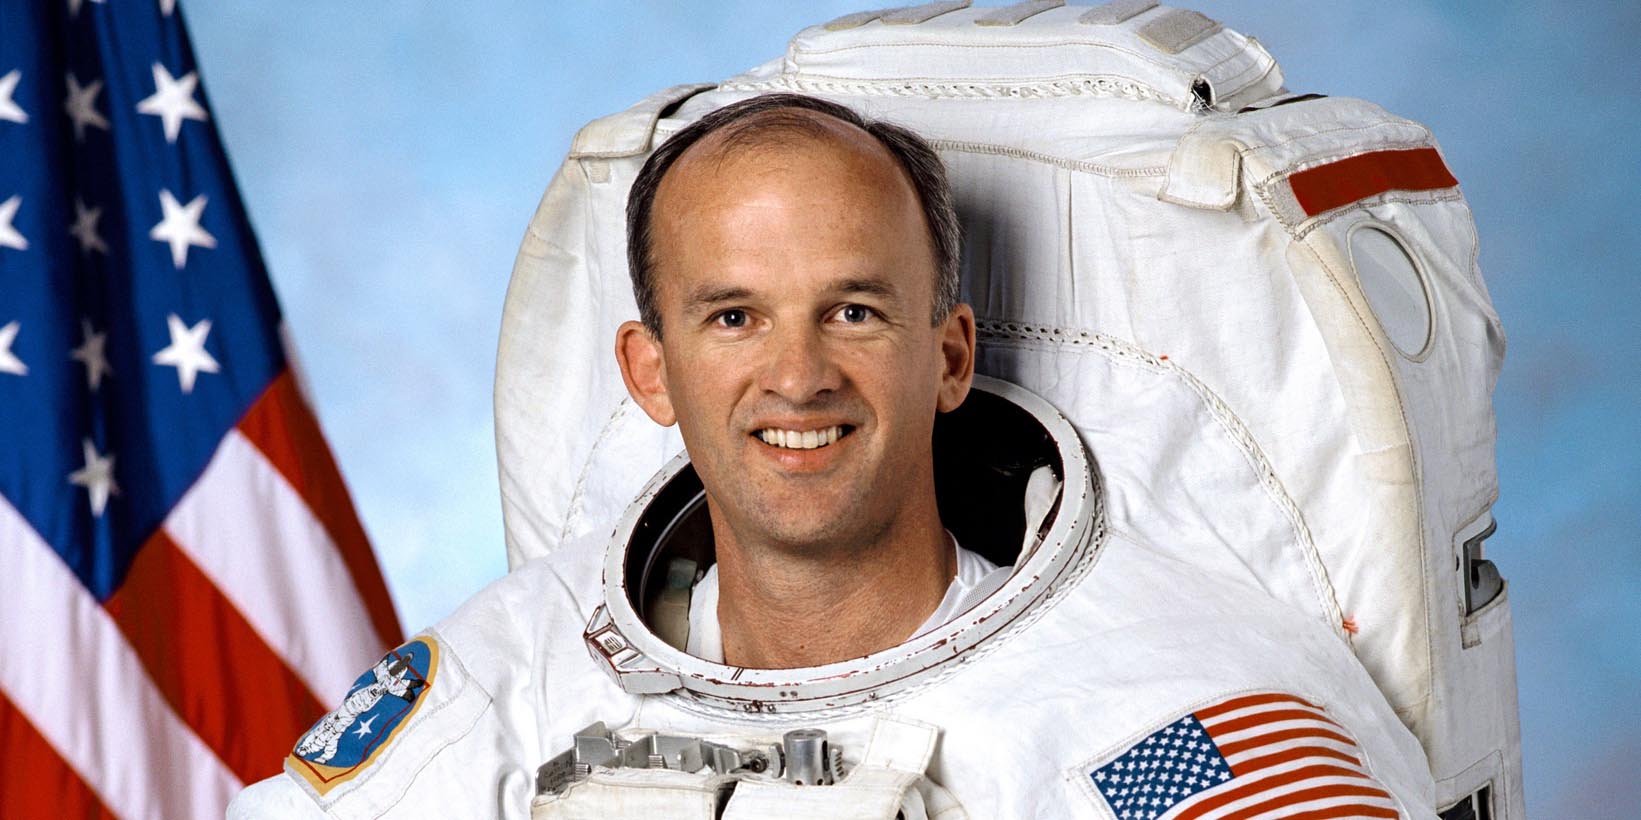 Astronaut to deliver Commencement address